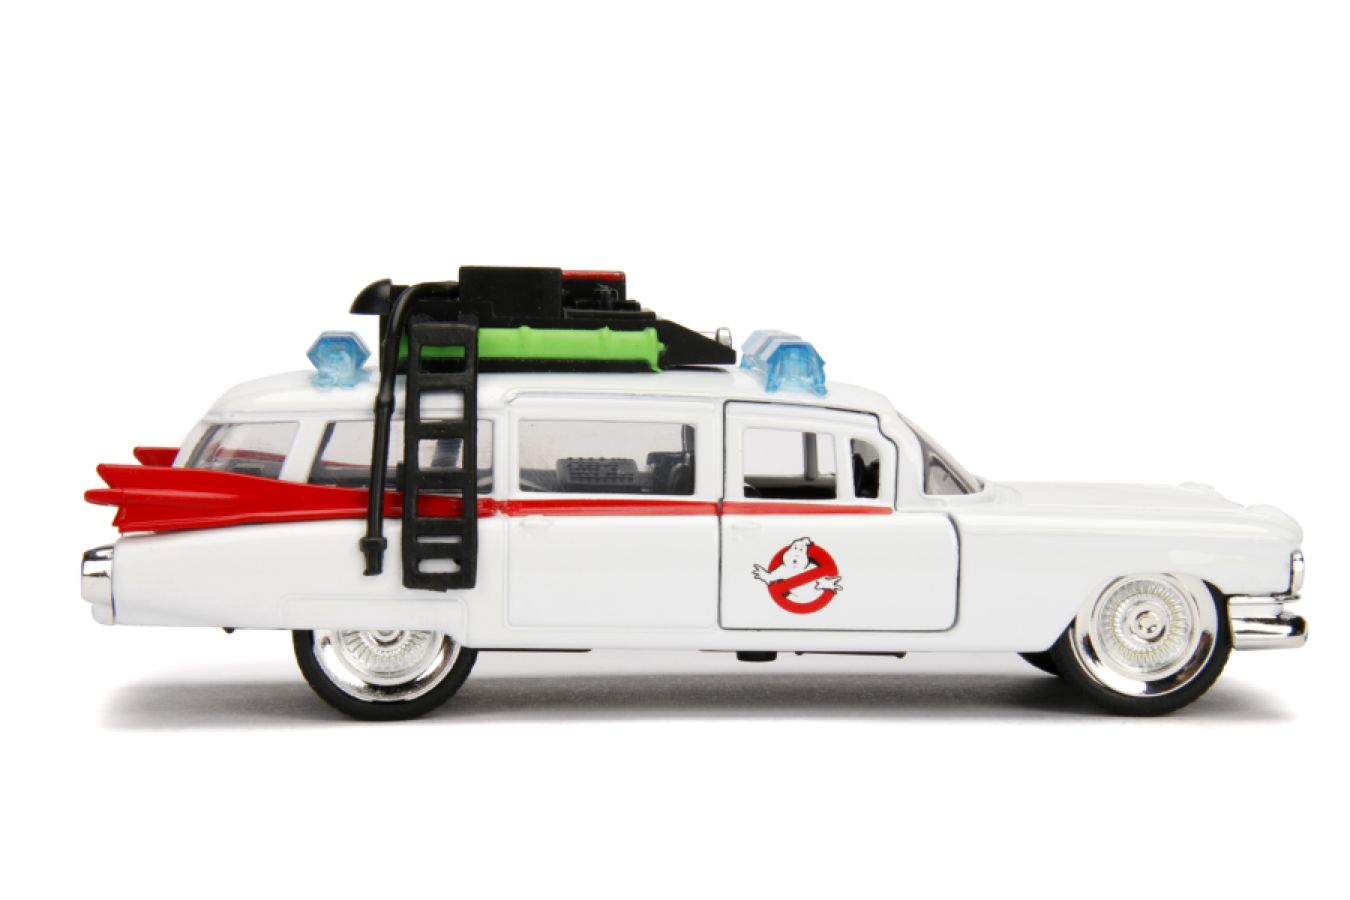 Ghostbusters (1984) - Ecto-1 Hollywood Rides 1:32 Scale Diecast Vehicle